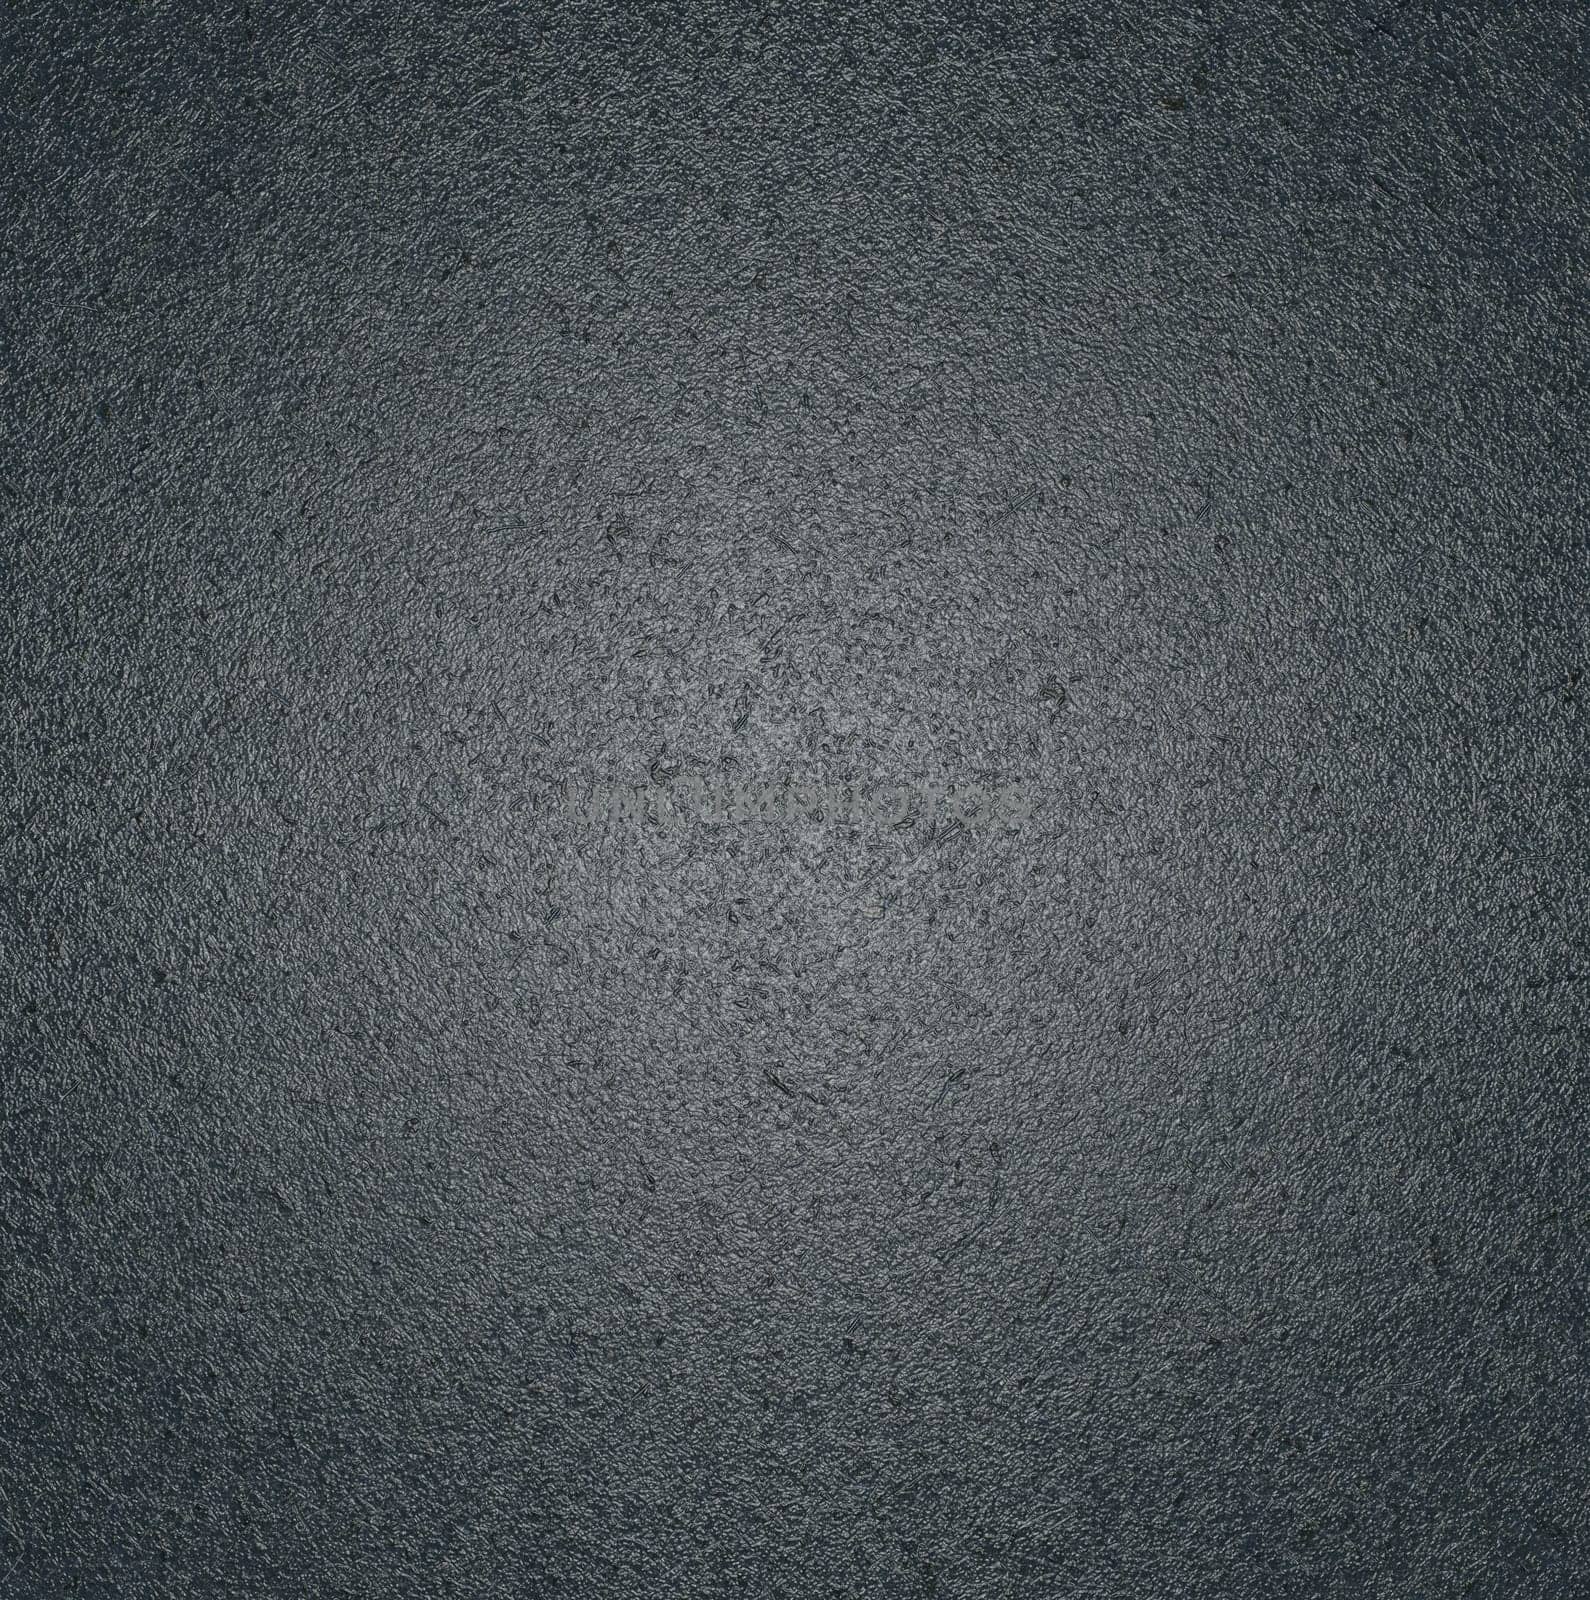 The texture of the background is gray with a rough glossy surface